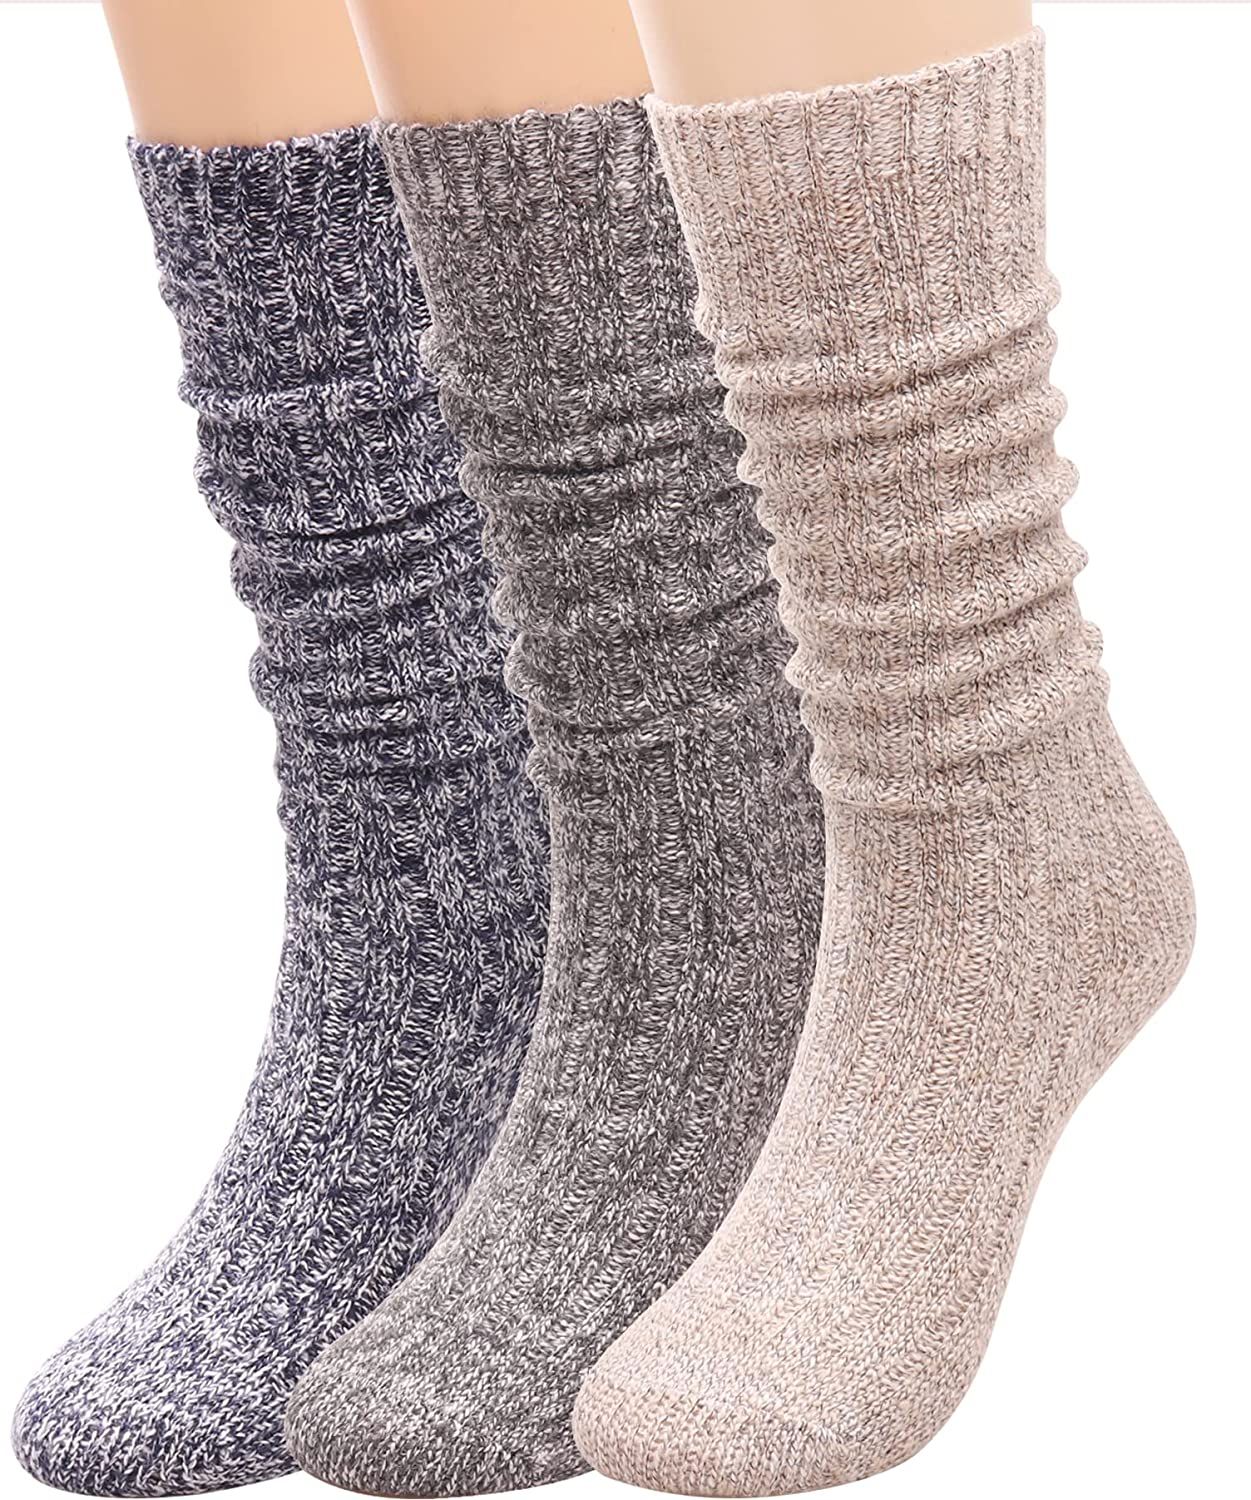 TINTAO 3 Pairs Women Winter Wool Cable Knit Crew Knee High Boot Socks,Size 5-11 W605 | Amazon (US)